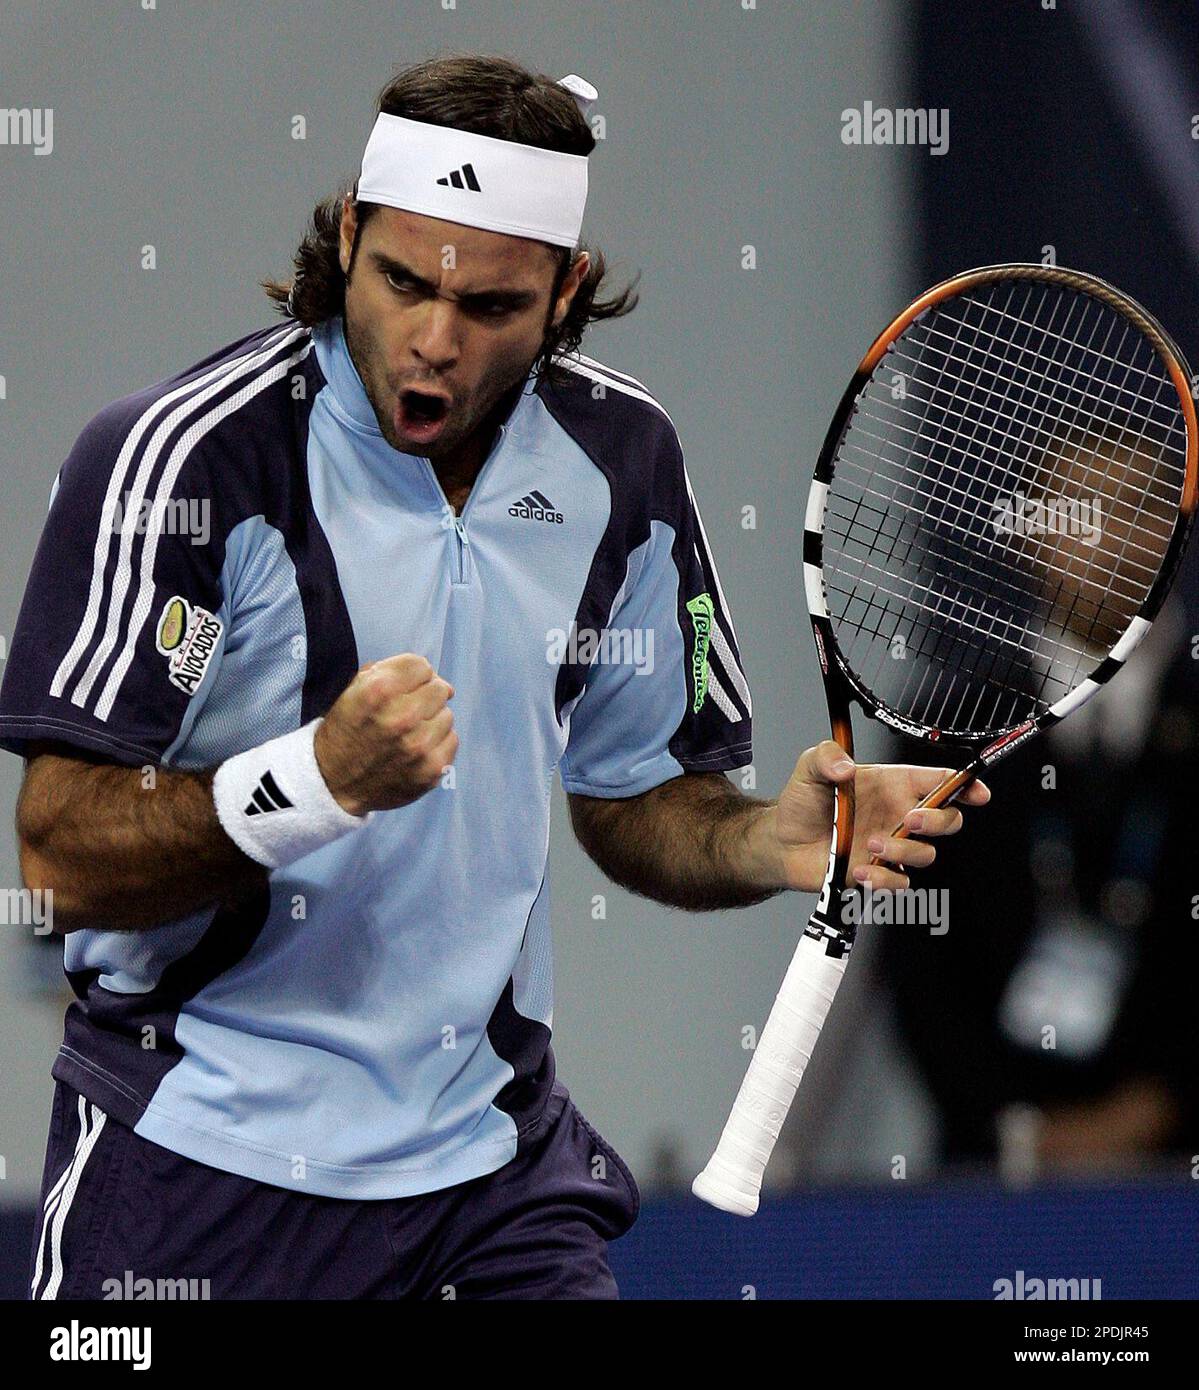 Chile's Fernando Gonzalez celebrates after gaining a point against  Argentina's Gaston Gaudio during the Shanghai Tennis Masters Cup held at  the Qi Zhong stadium in Shanghai, China, Friday, Nov 18, 2005. (AP